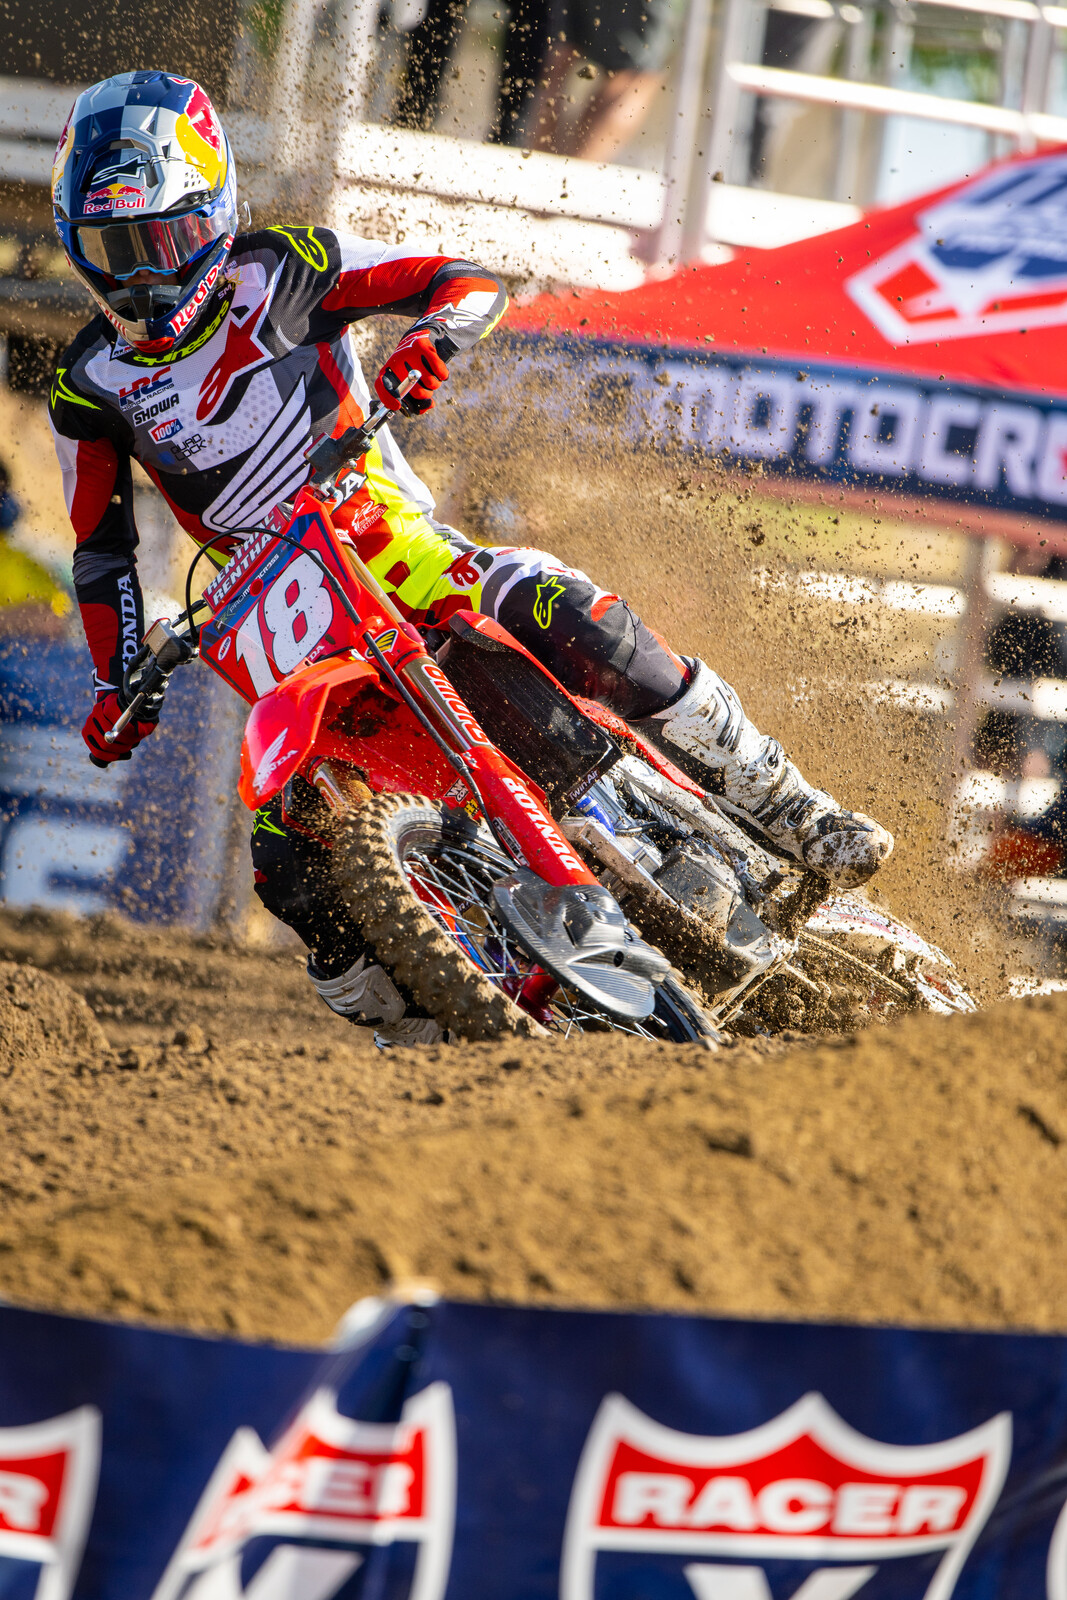 Live Updates from the 2023 Hangtown Pro Motocross Classic